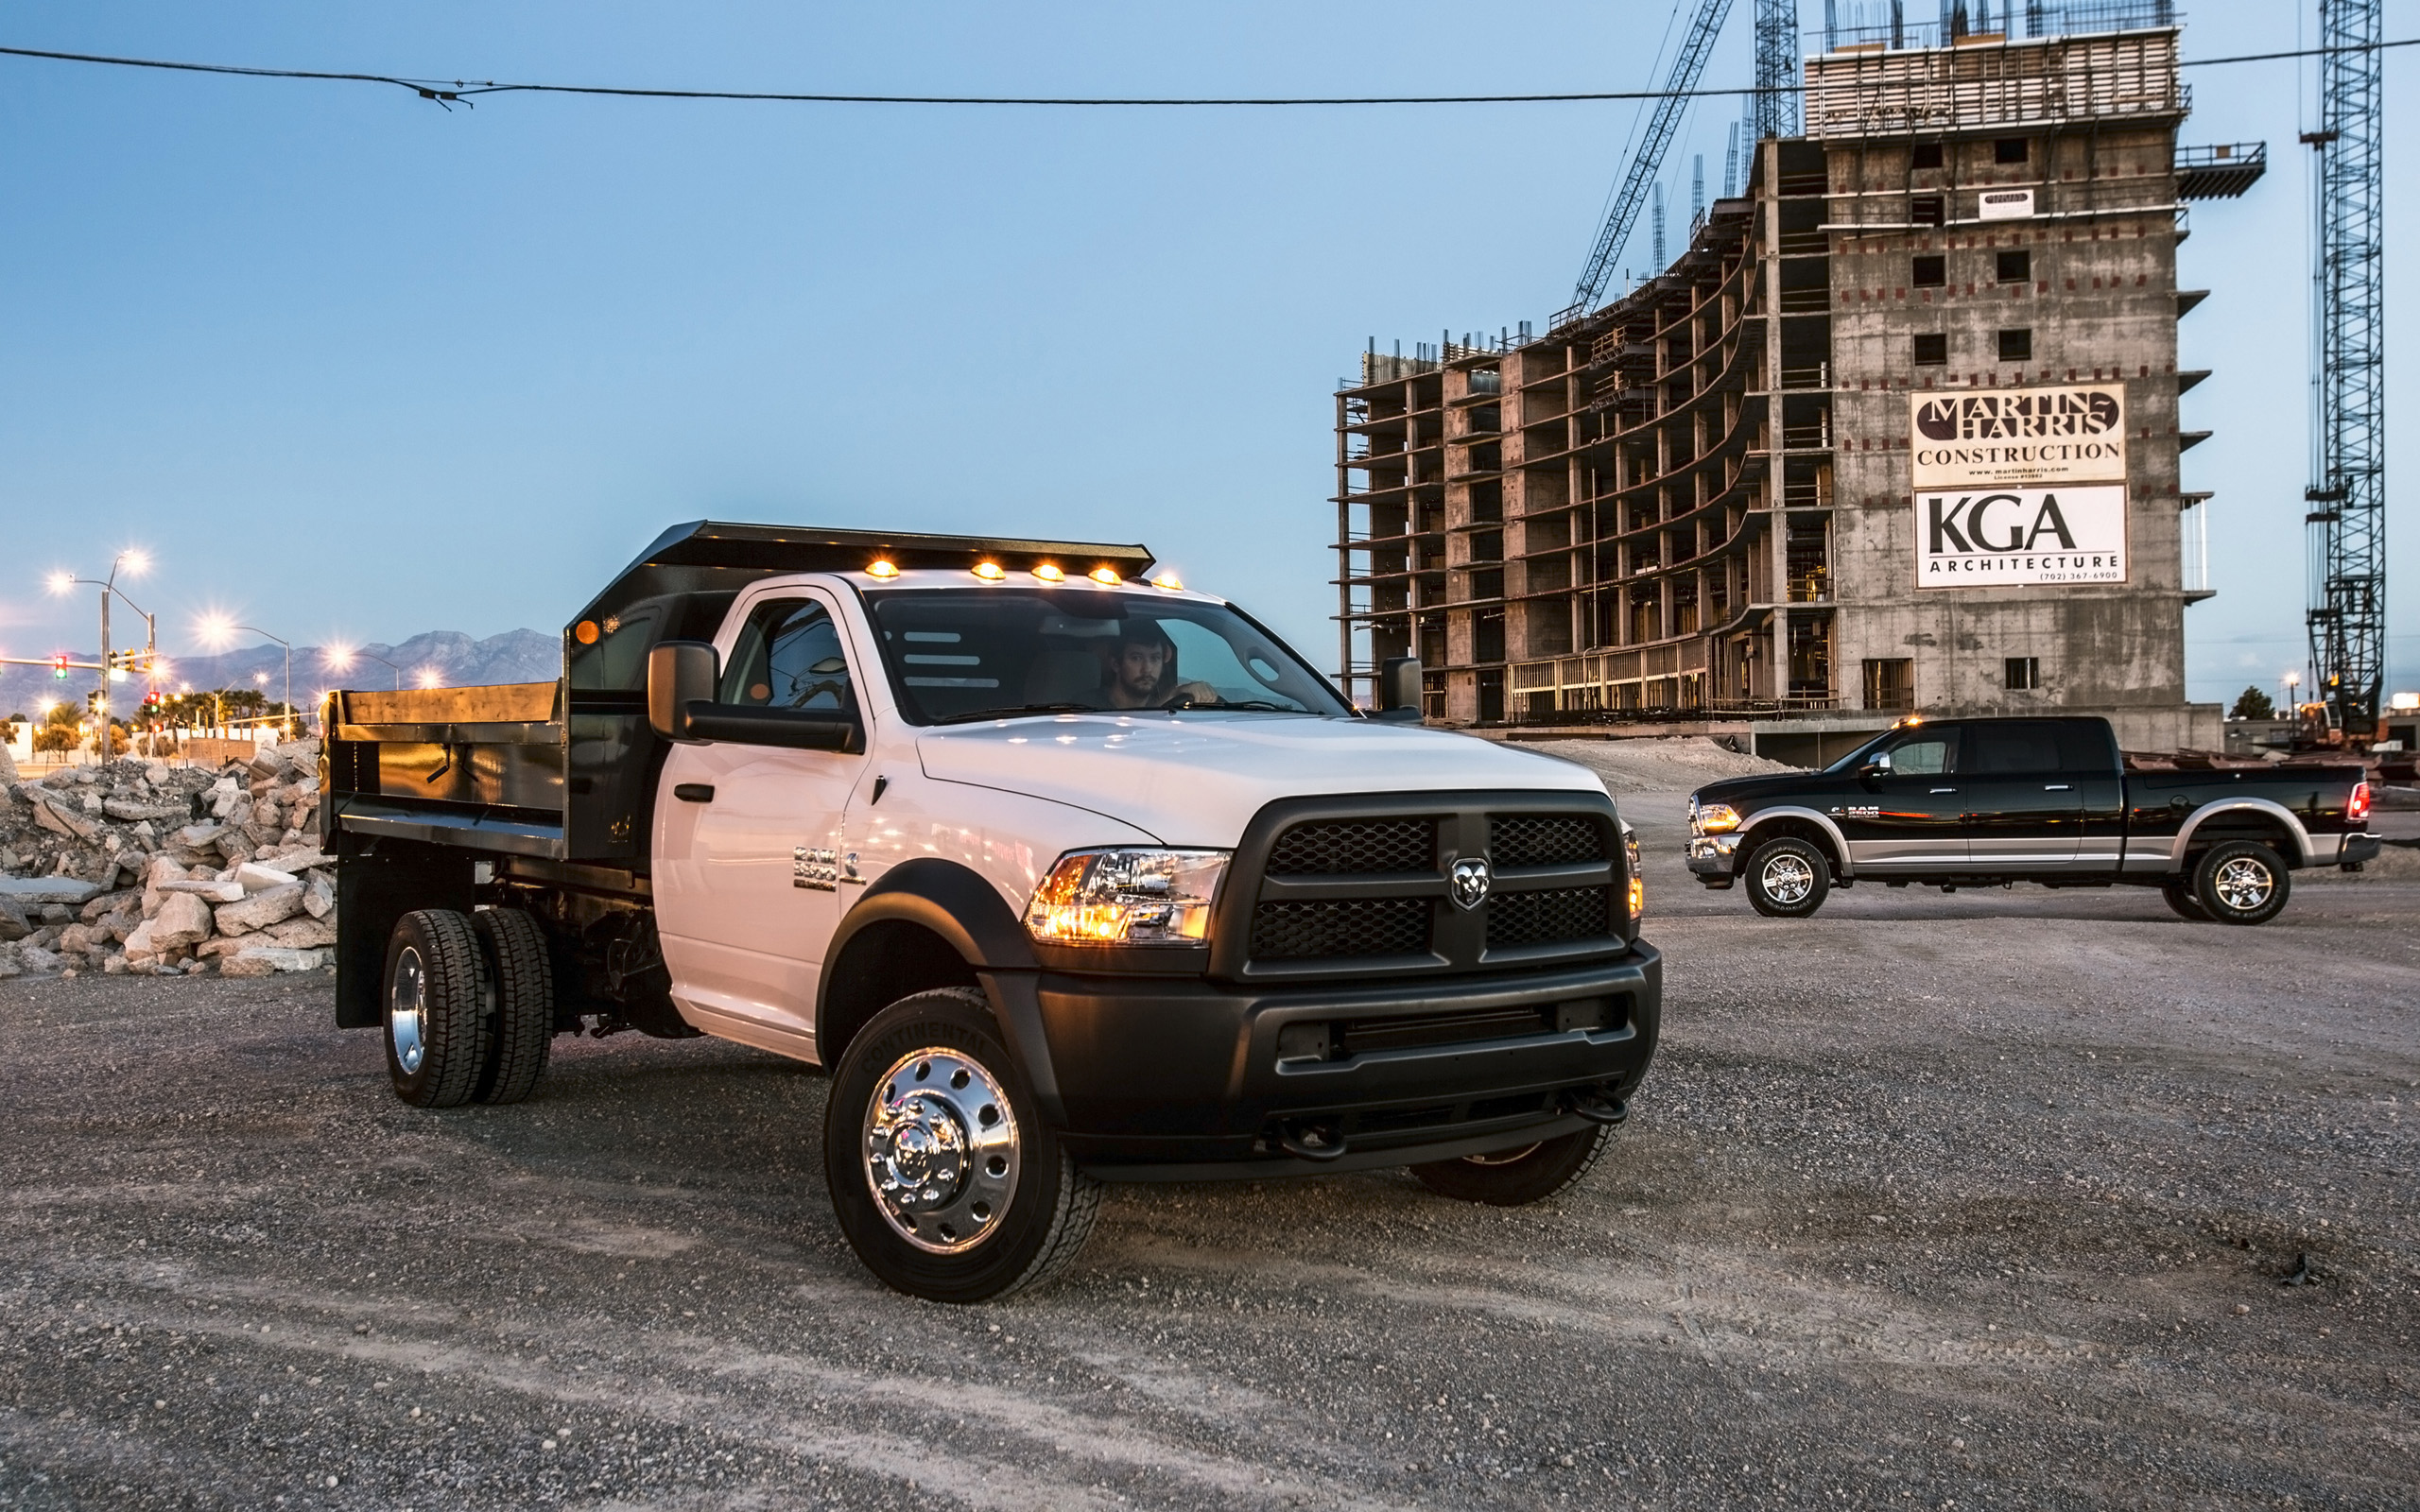 2014, Dodge, Ram, 5500, 4x4, Chassis, Cab Wallpaper